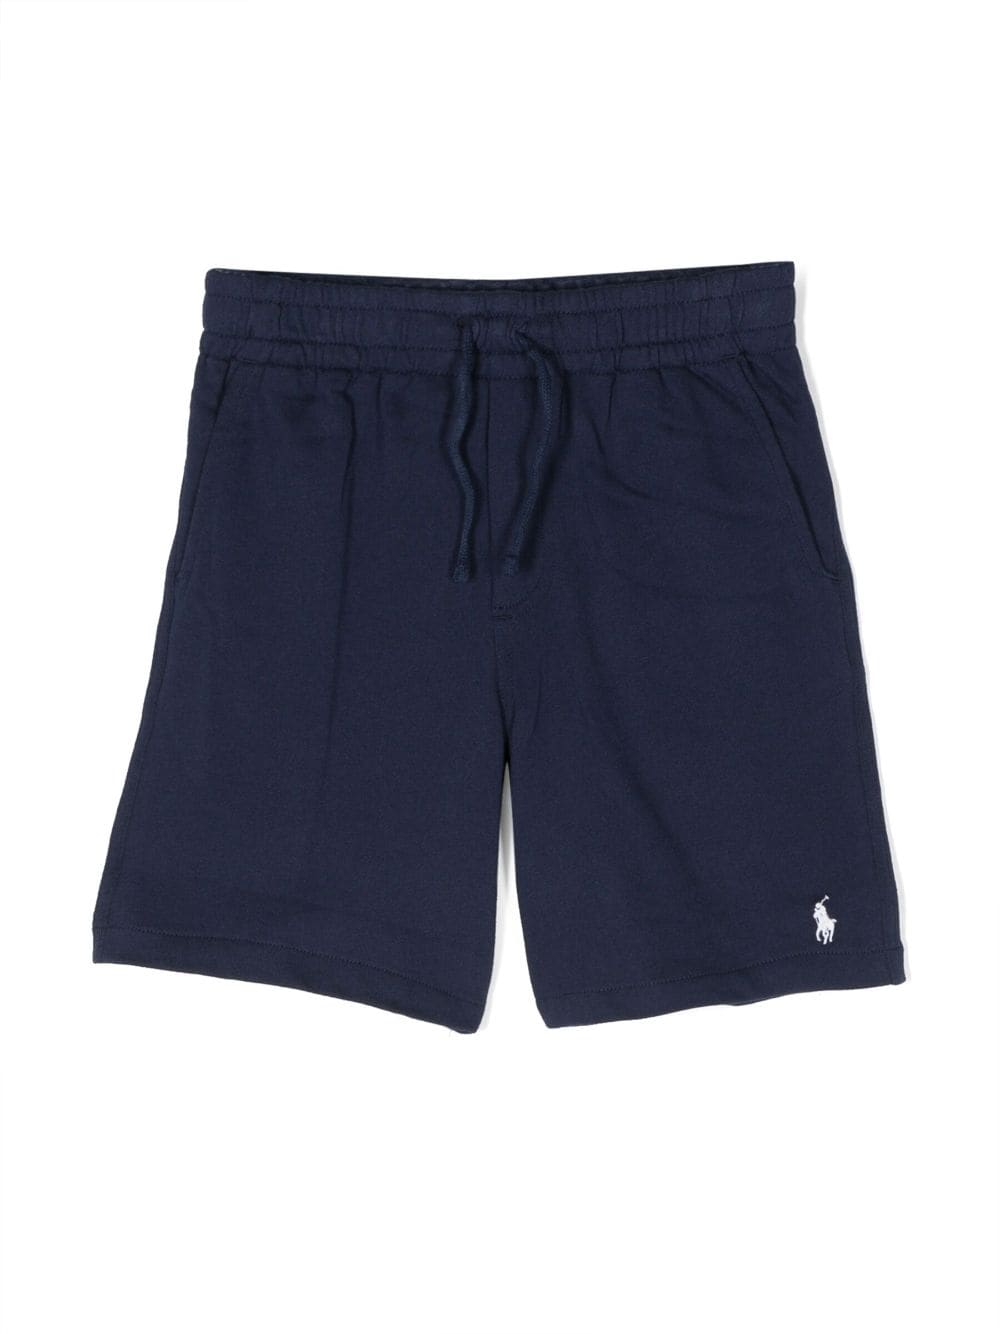 Image 1 of Ralph Lauren Kids Athletic Polo Pony cotton shorts